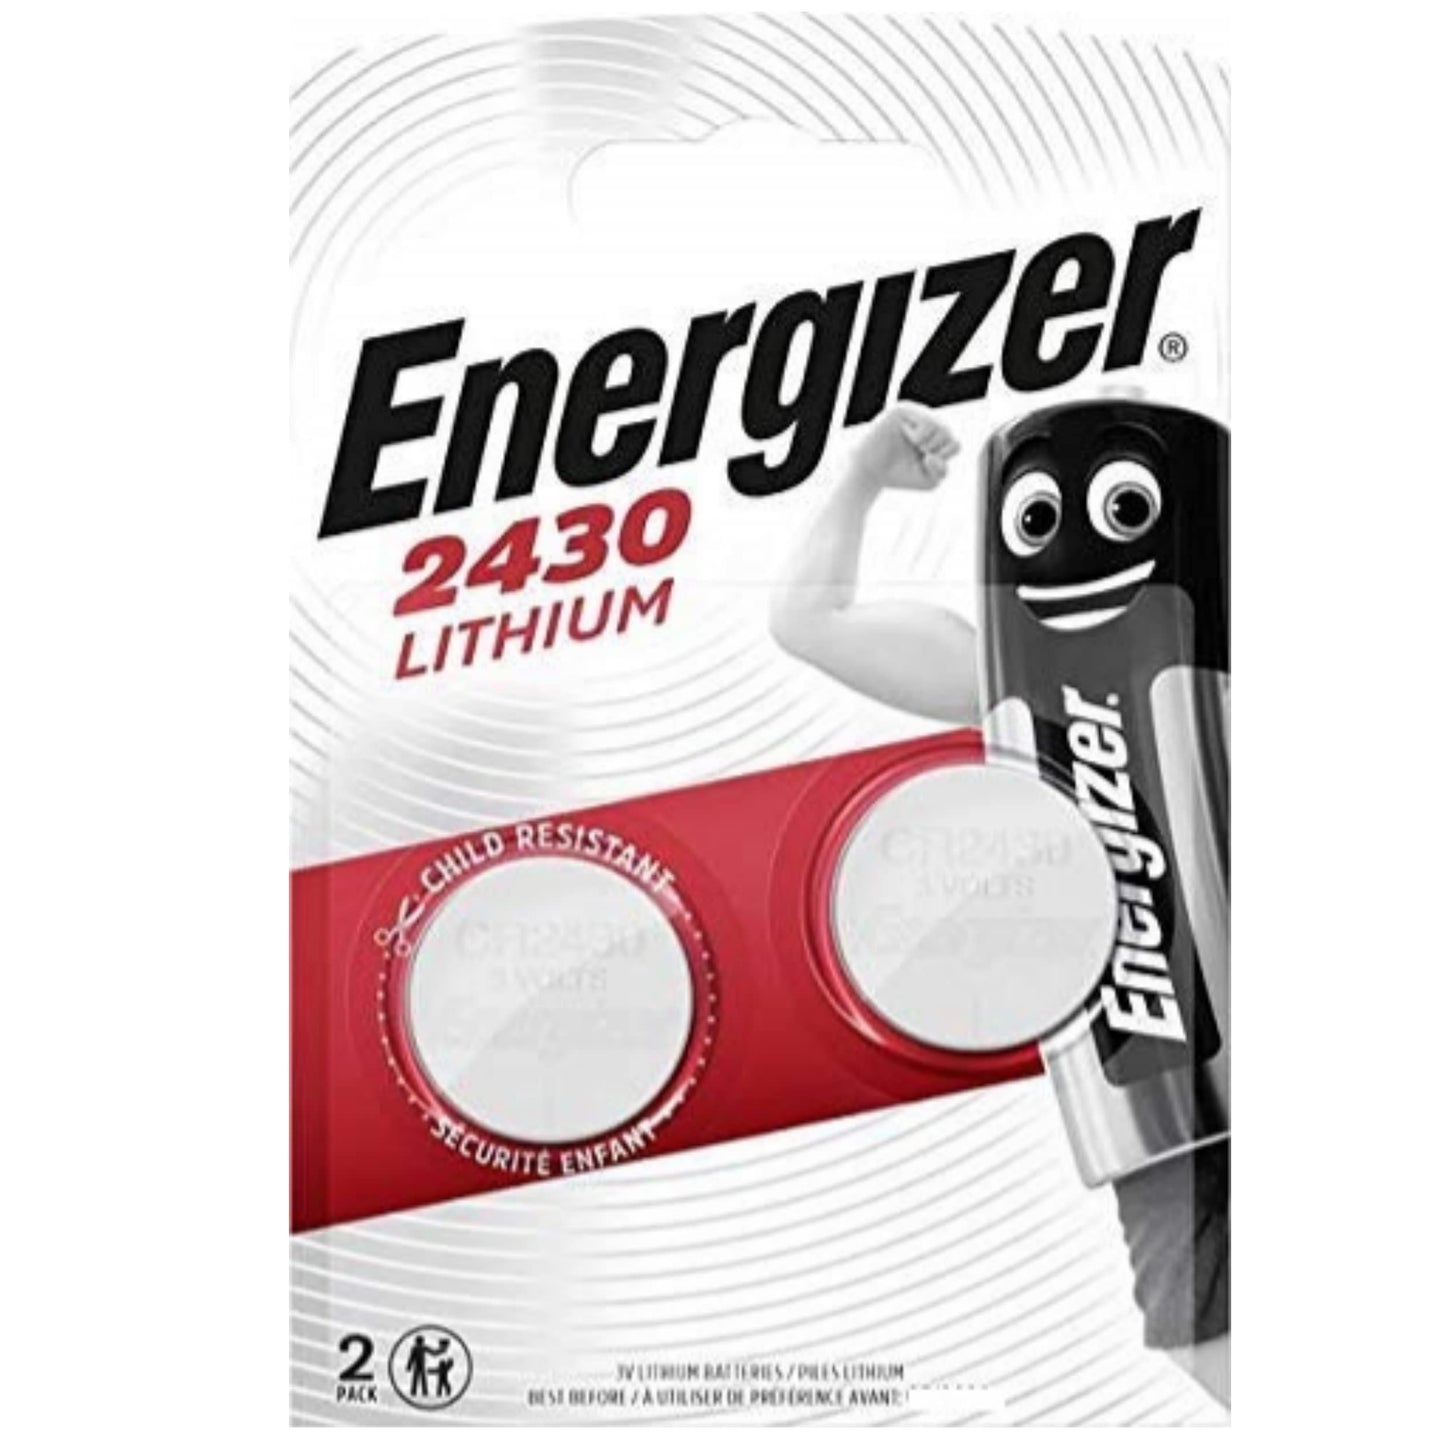 3 pack Energizer CR2430 Lithium Coin Button Cell battery